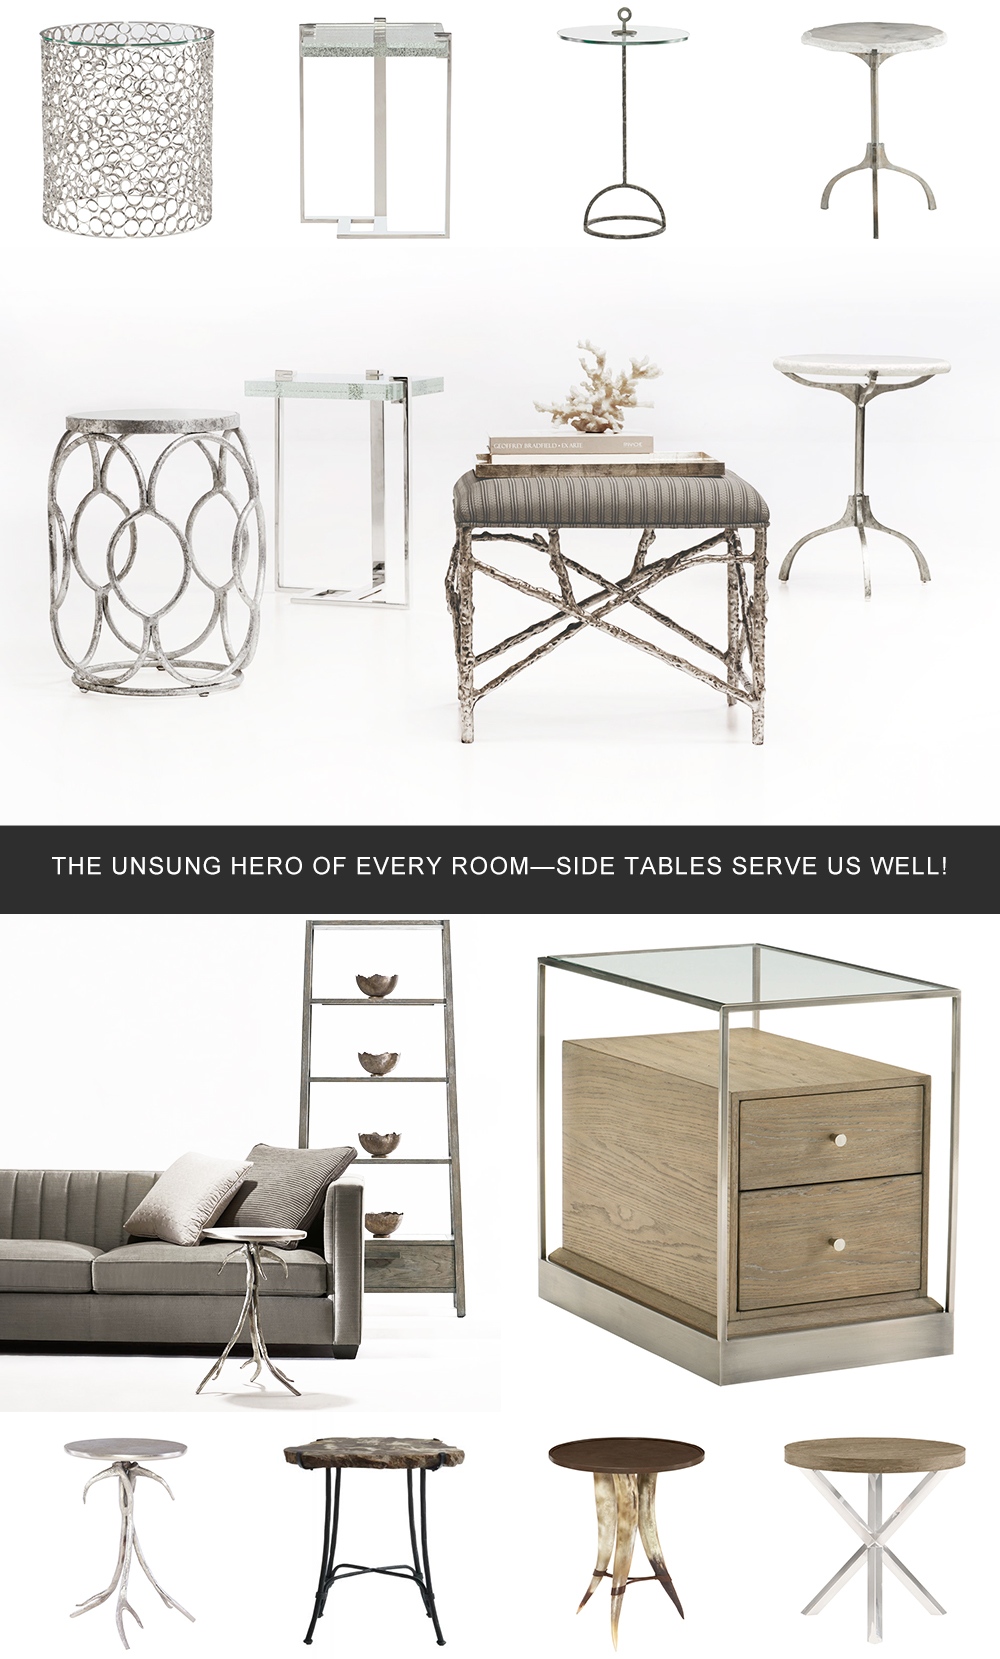 Introducing our newest showroom collections for the home